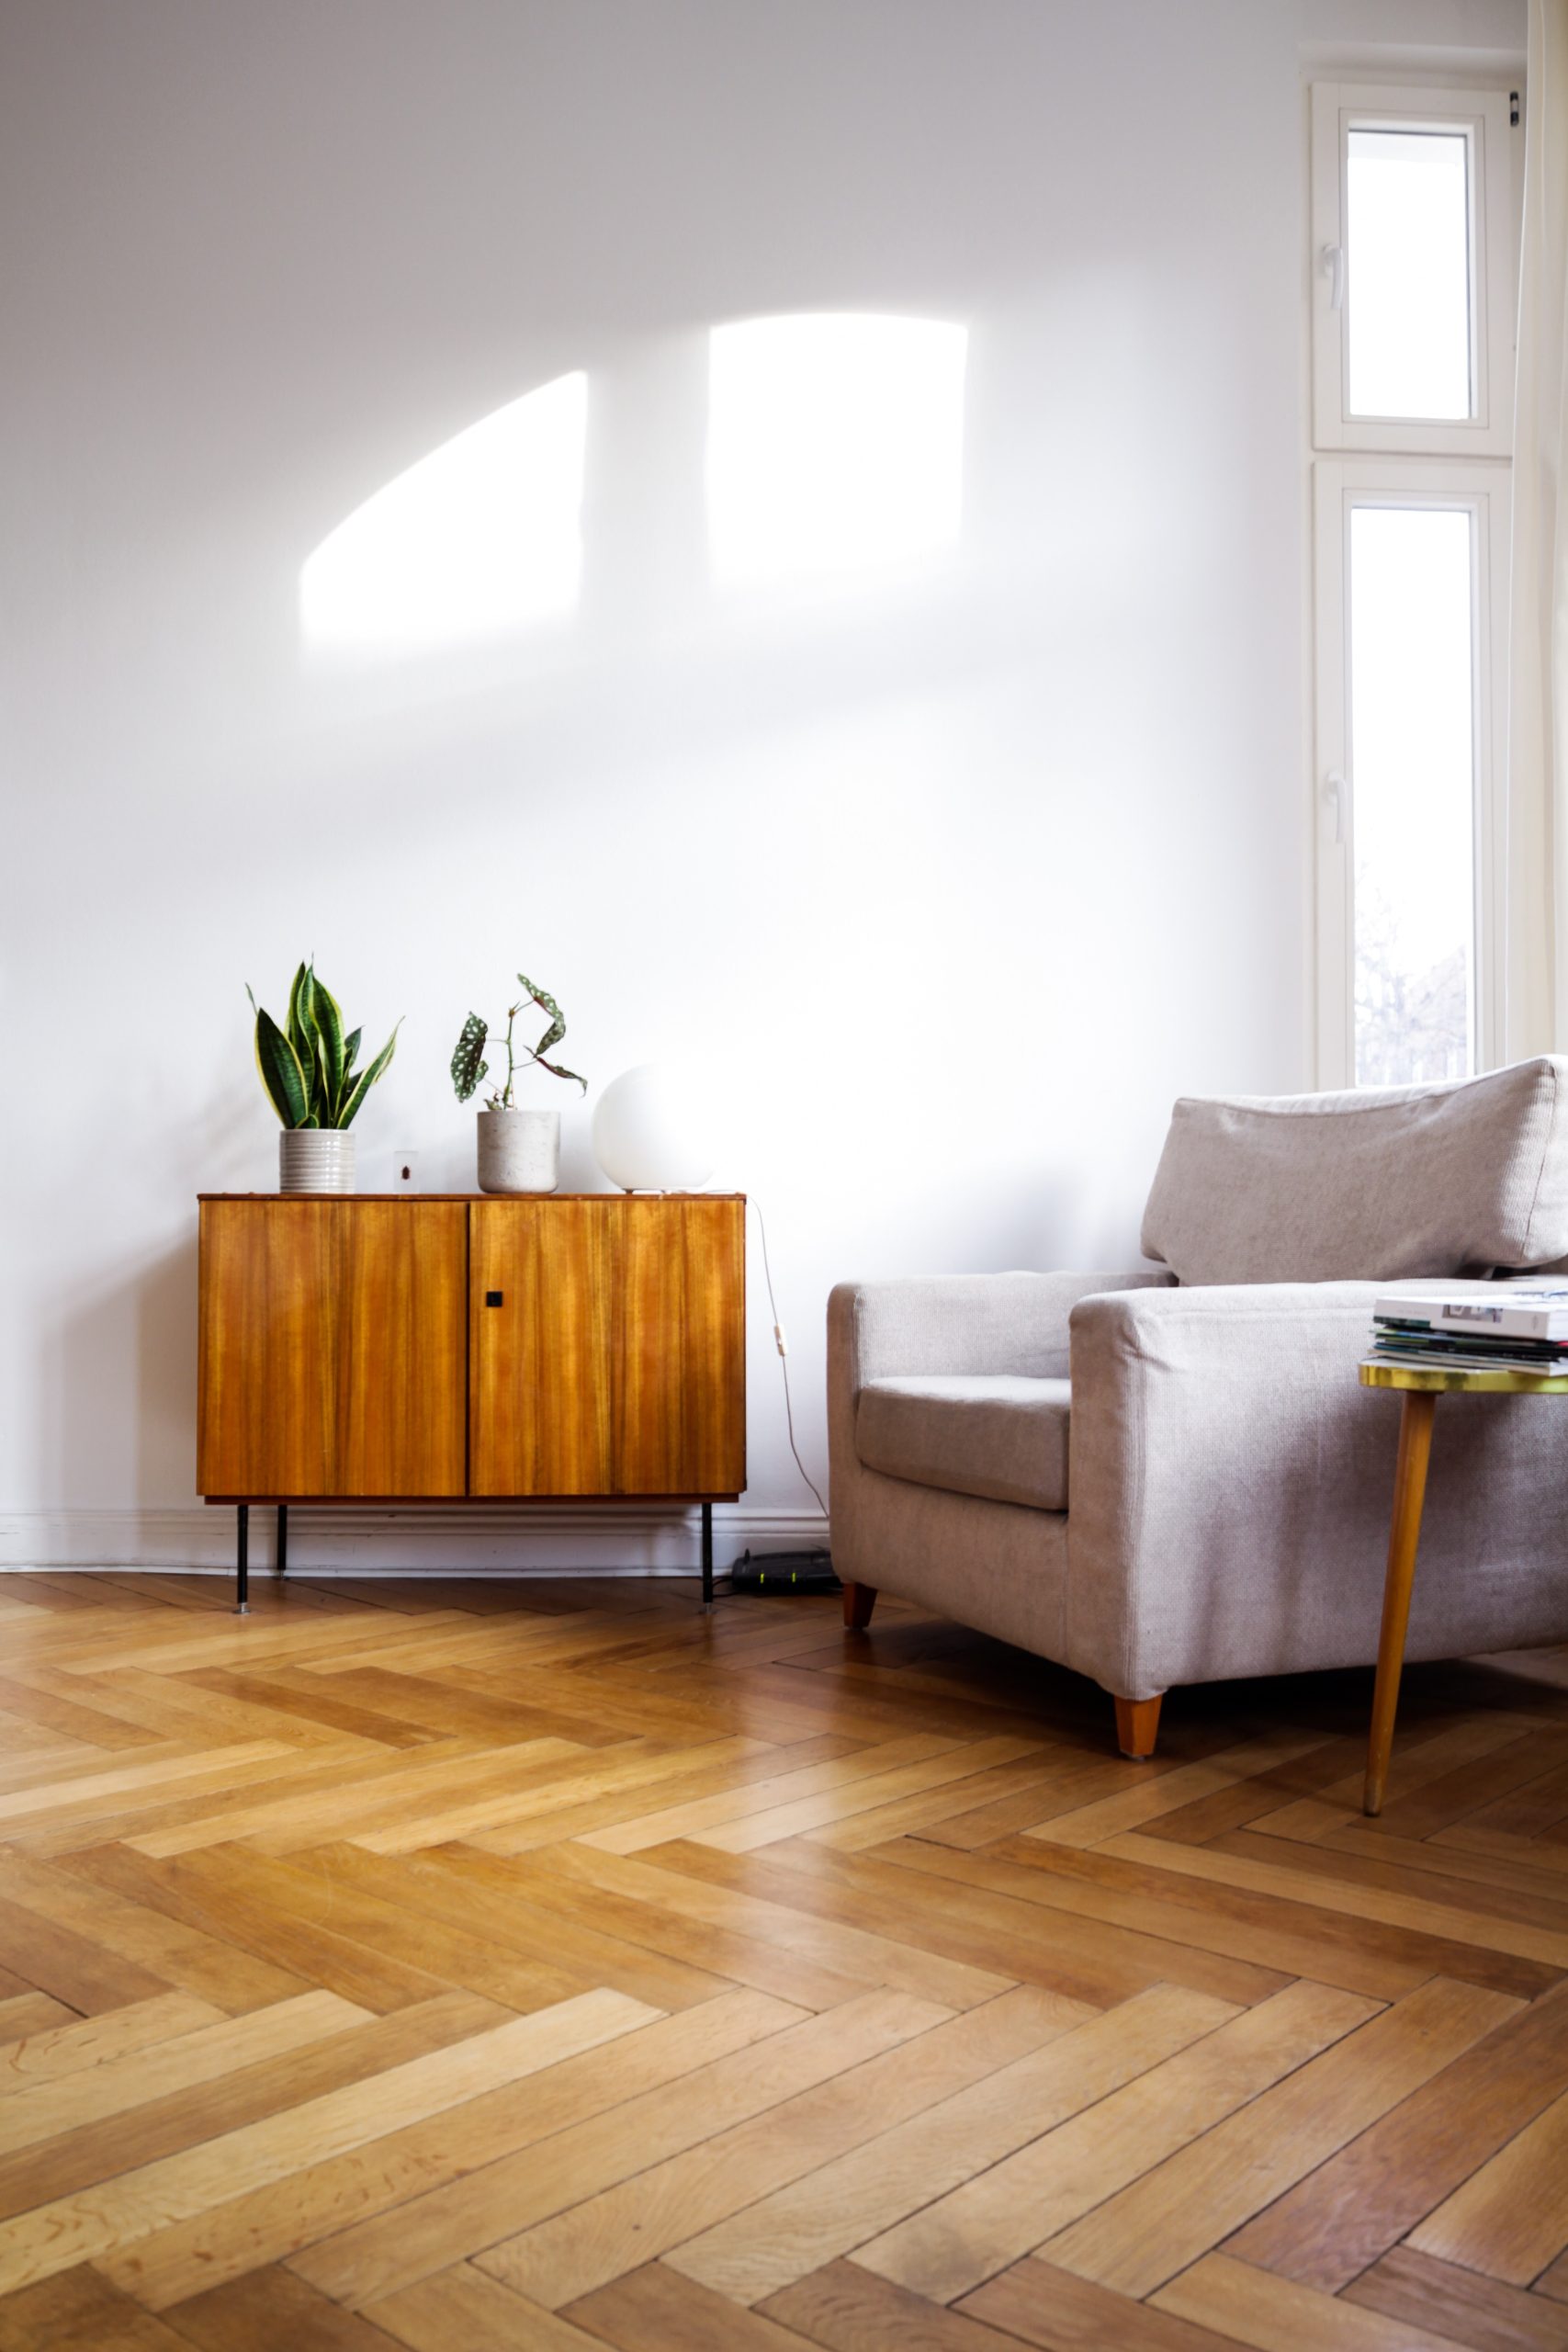 Aesthetic Elements to Consider for Hardwood Flooring